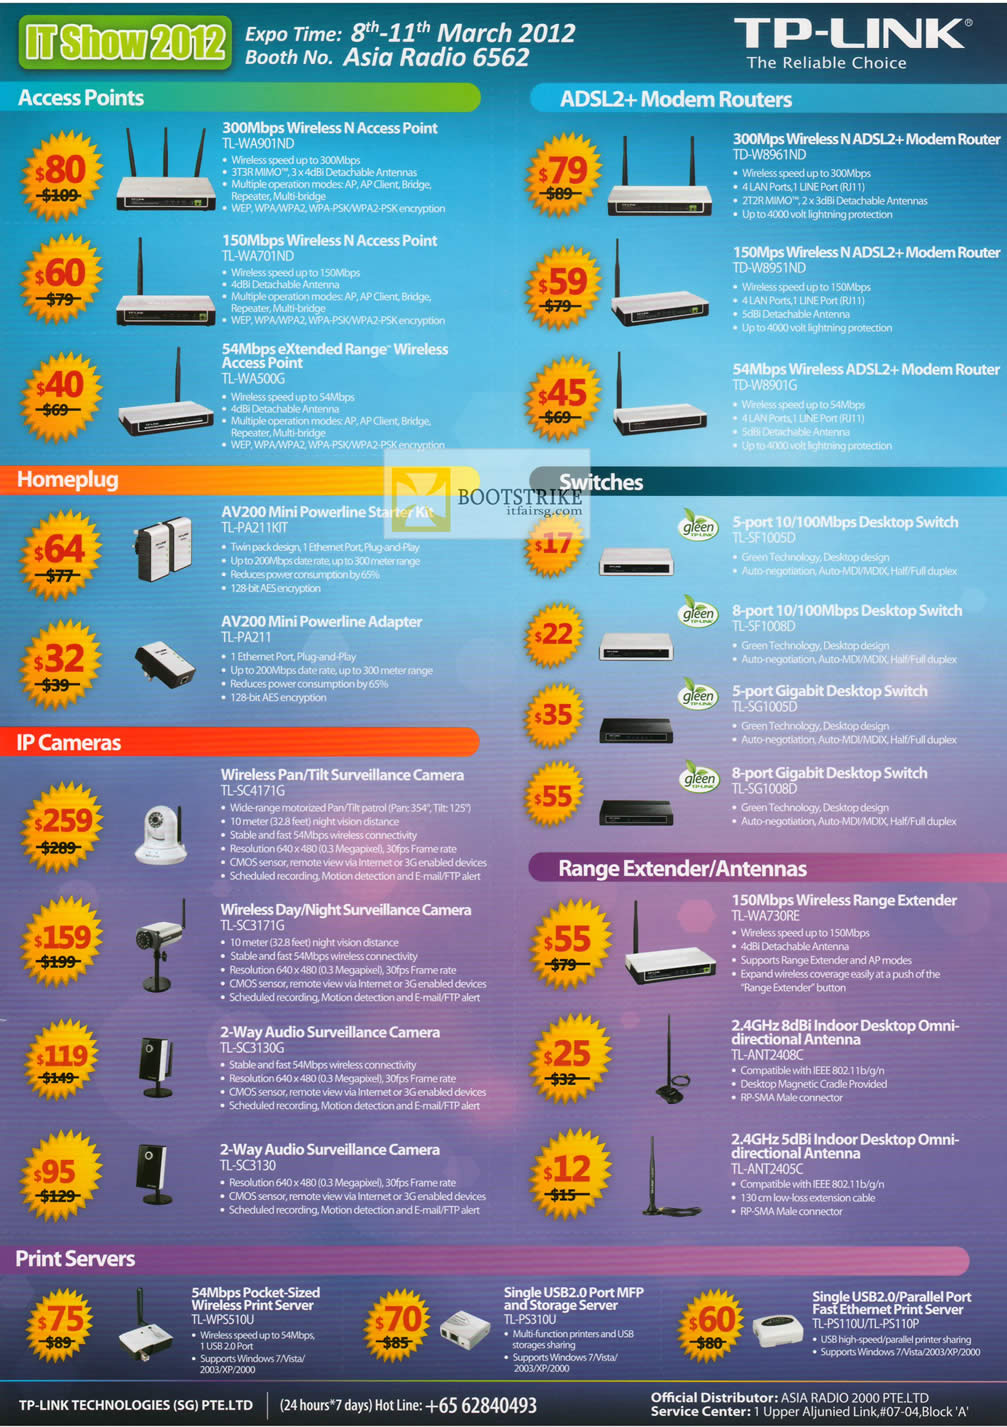 IT SHOW 2012 price list image brochure of Asia Radio TP-Link Access Points, ADSL2 Modem Router, Homeplug, Switch, IPCam, Range Extender, Antenna, Print Server